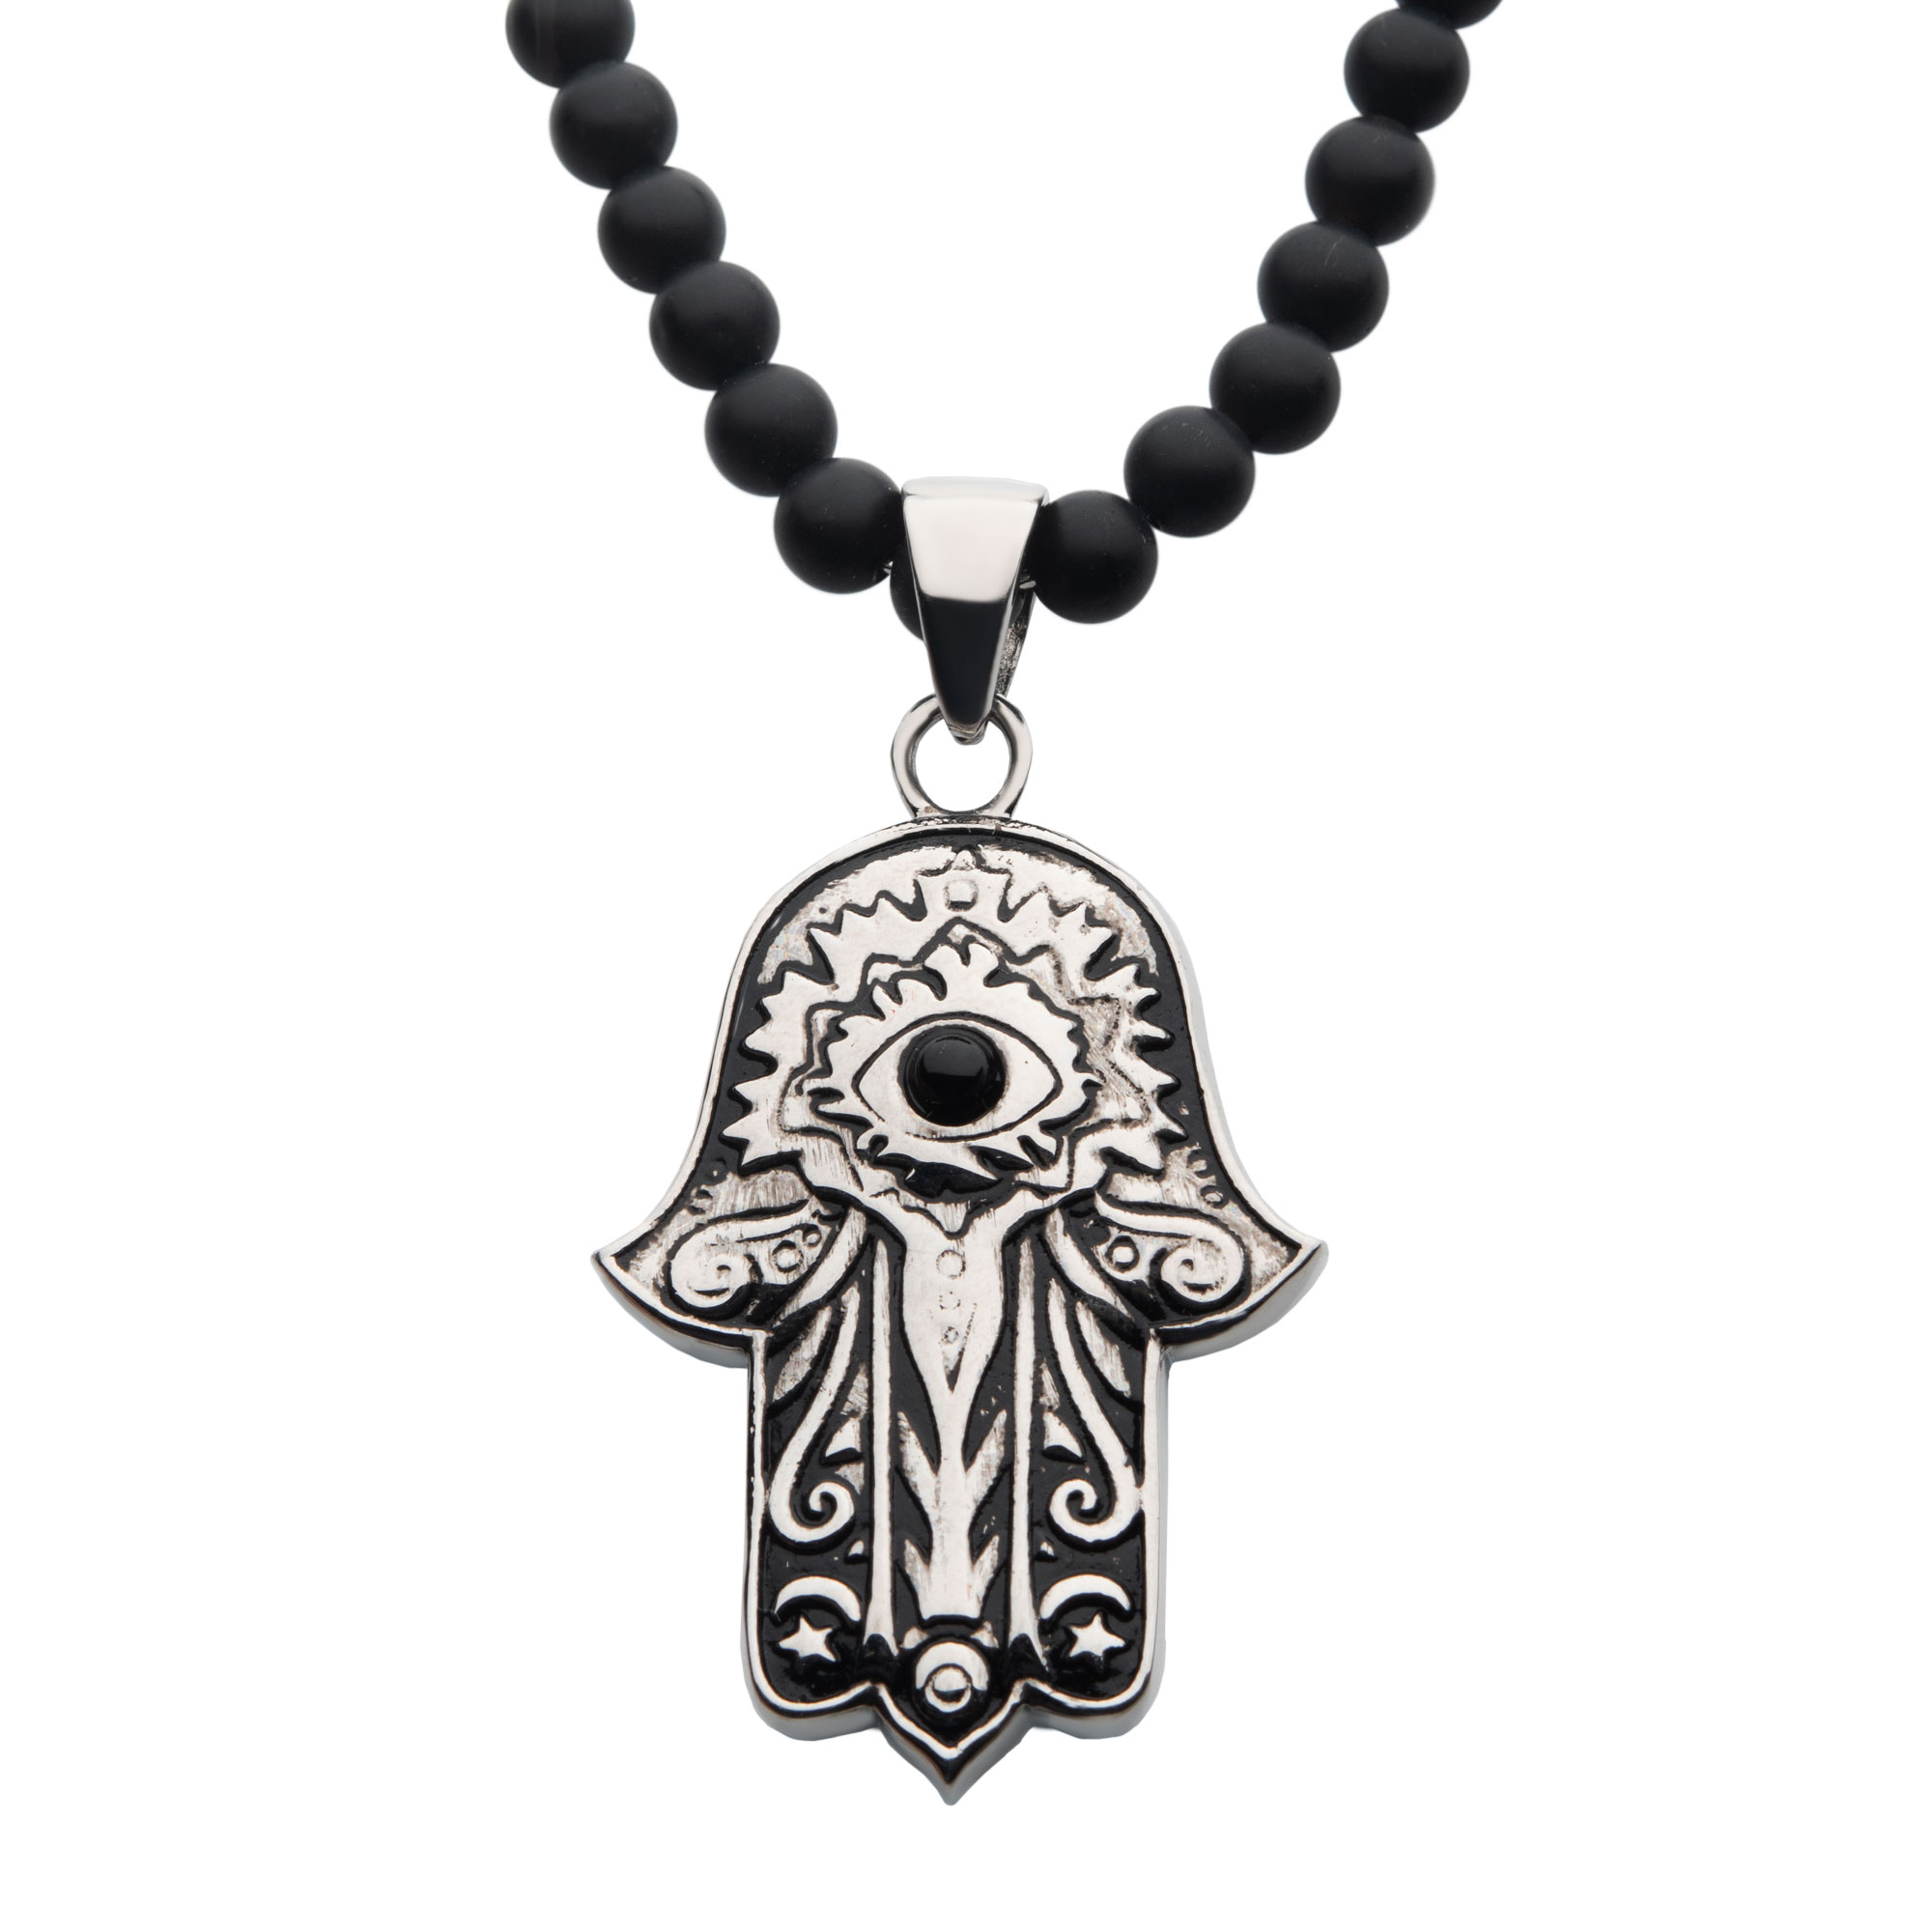 Stainless Steel with Centerpiece Black Agate Stone Hamsa Pendant, with Black Agate Stone Bead Necklace Morin Jewelers Southbridge, MA